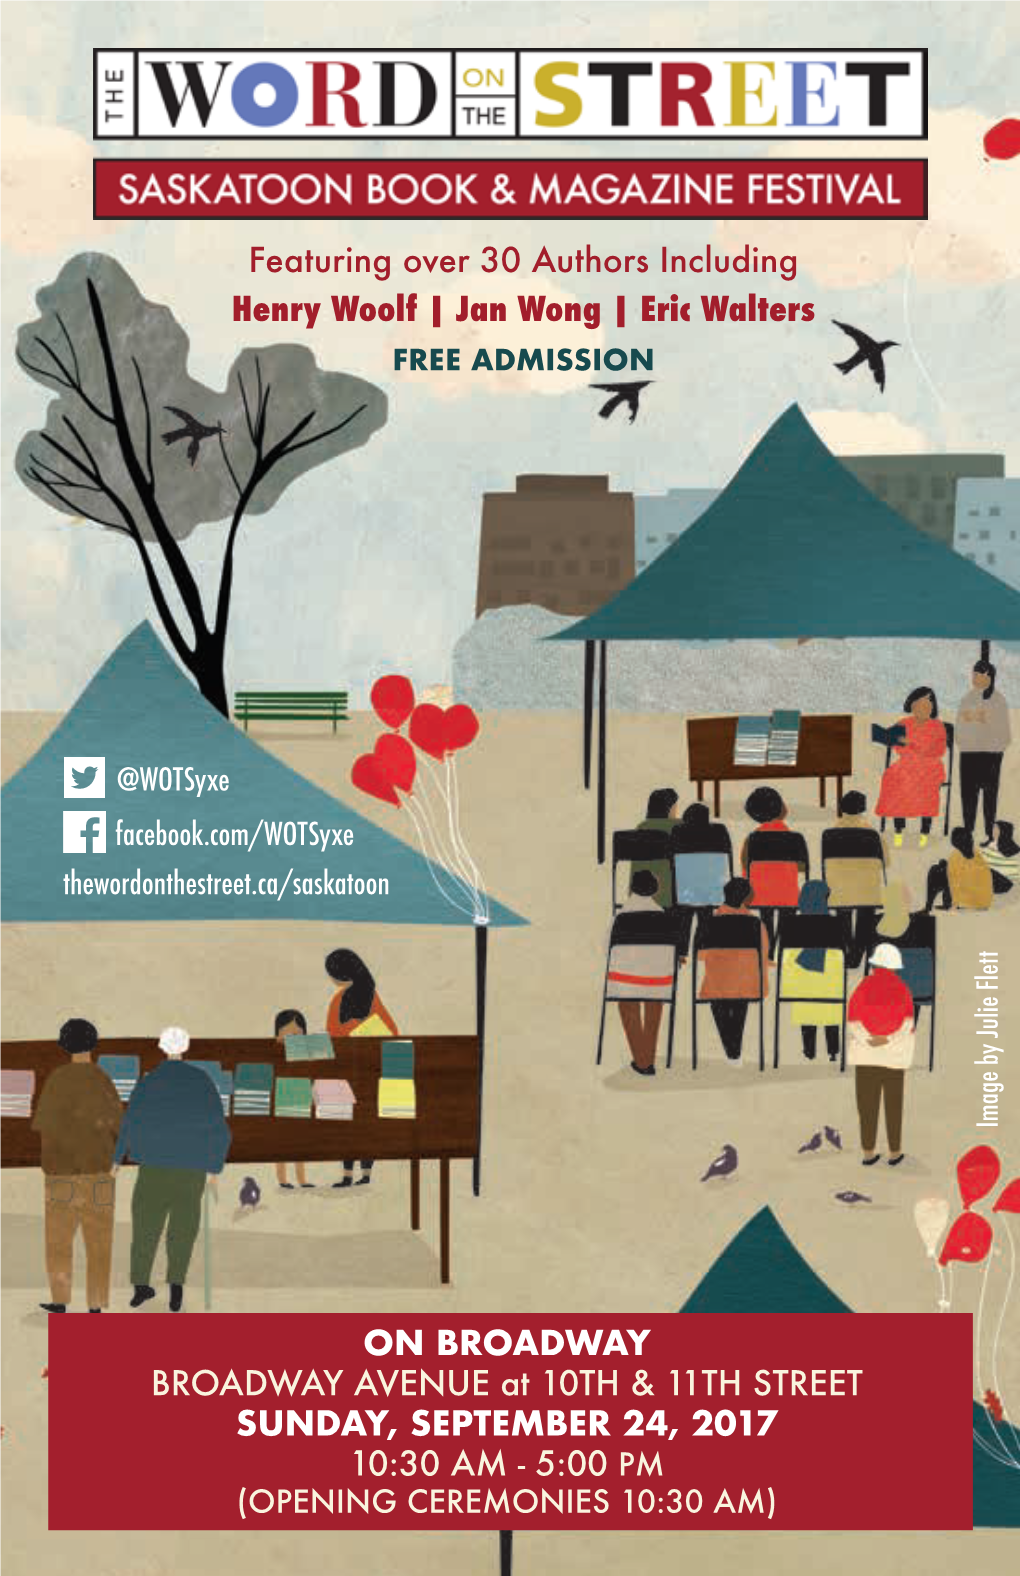 Featuring Over 30 Authors Including Henry Woolf | Jan Wong | Eric Walters FREE ADMISSION